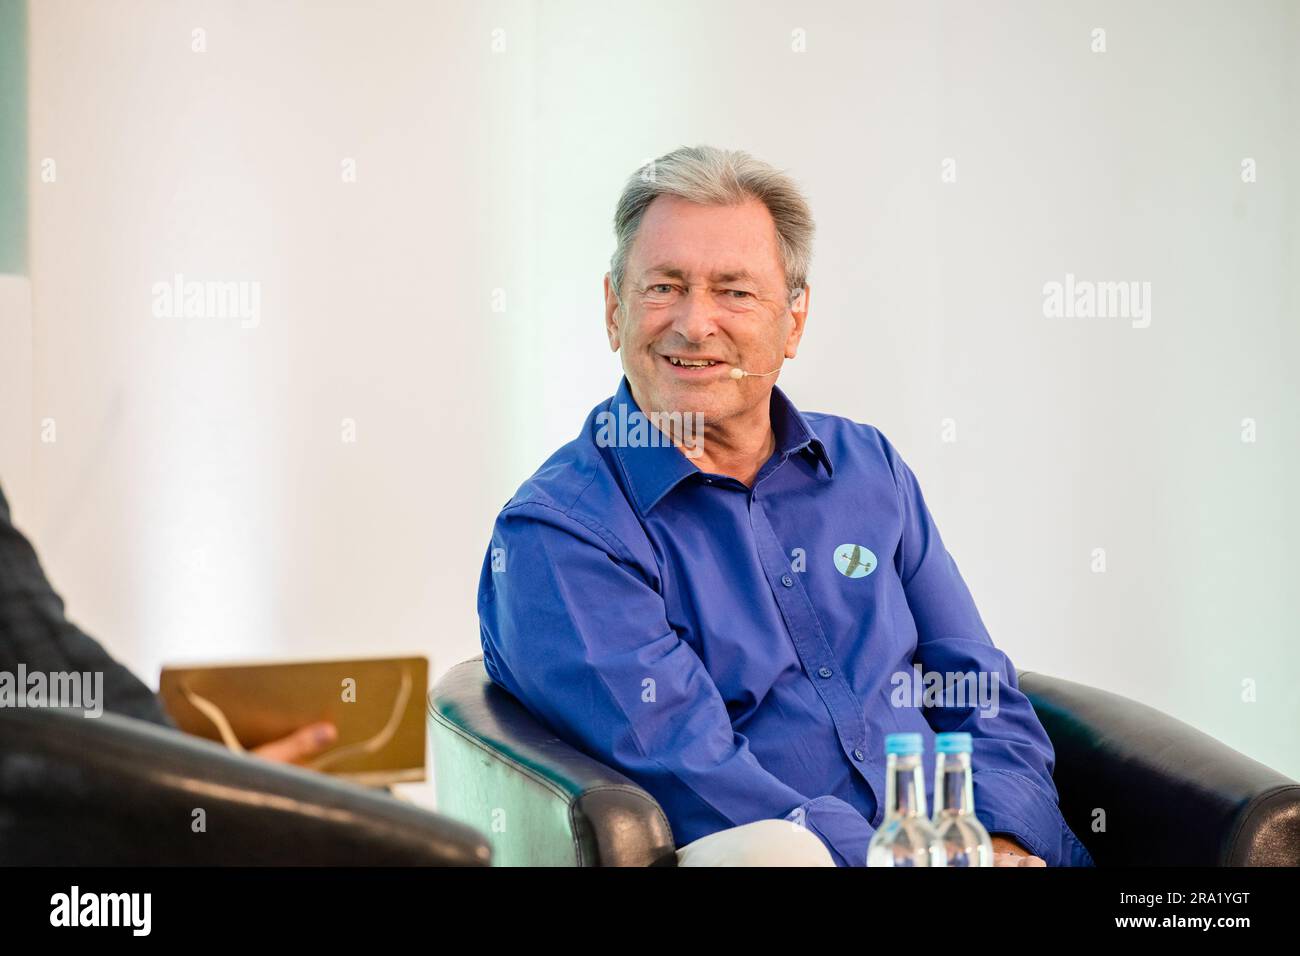 Alan Titchmarsh MBE, English gardener, broadcaster, TV presenter, poet, and novelist chatted to Tania Compton for about his life in gardening, growing up in Ilkley and his new book, Trowel and Error. Stock Photo